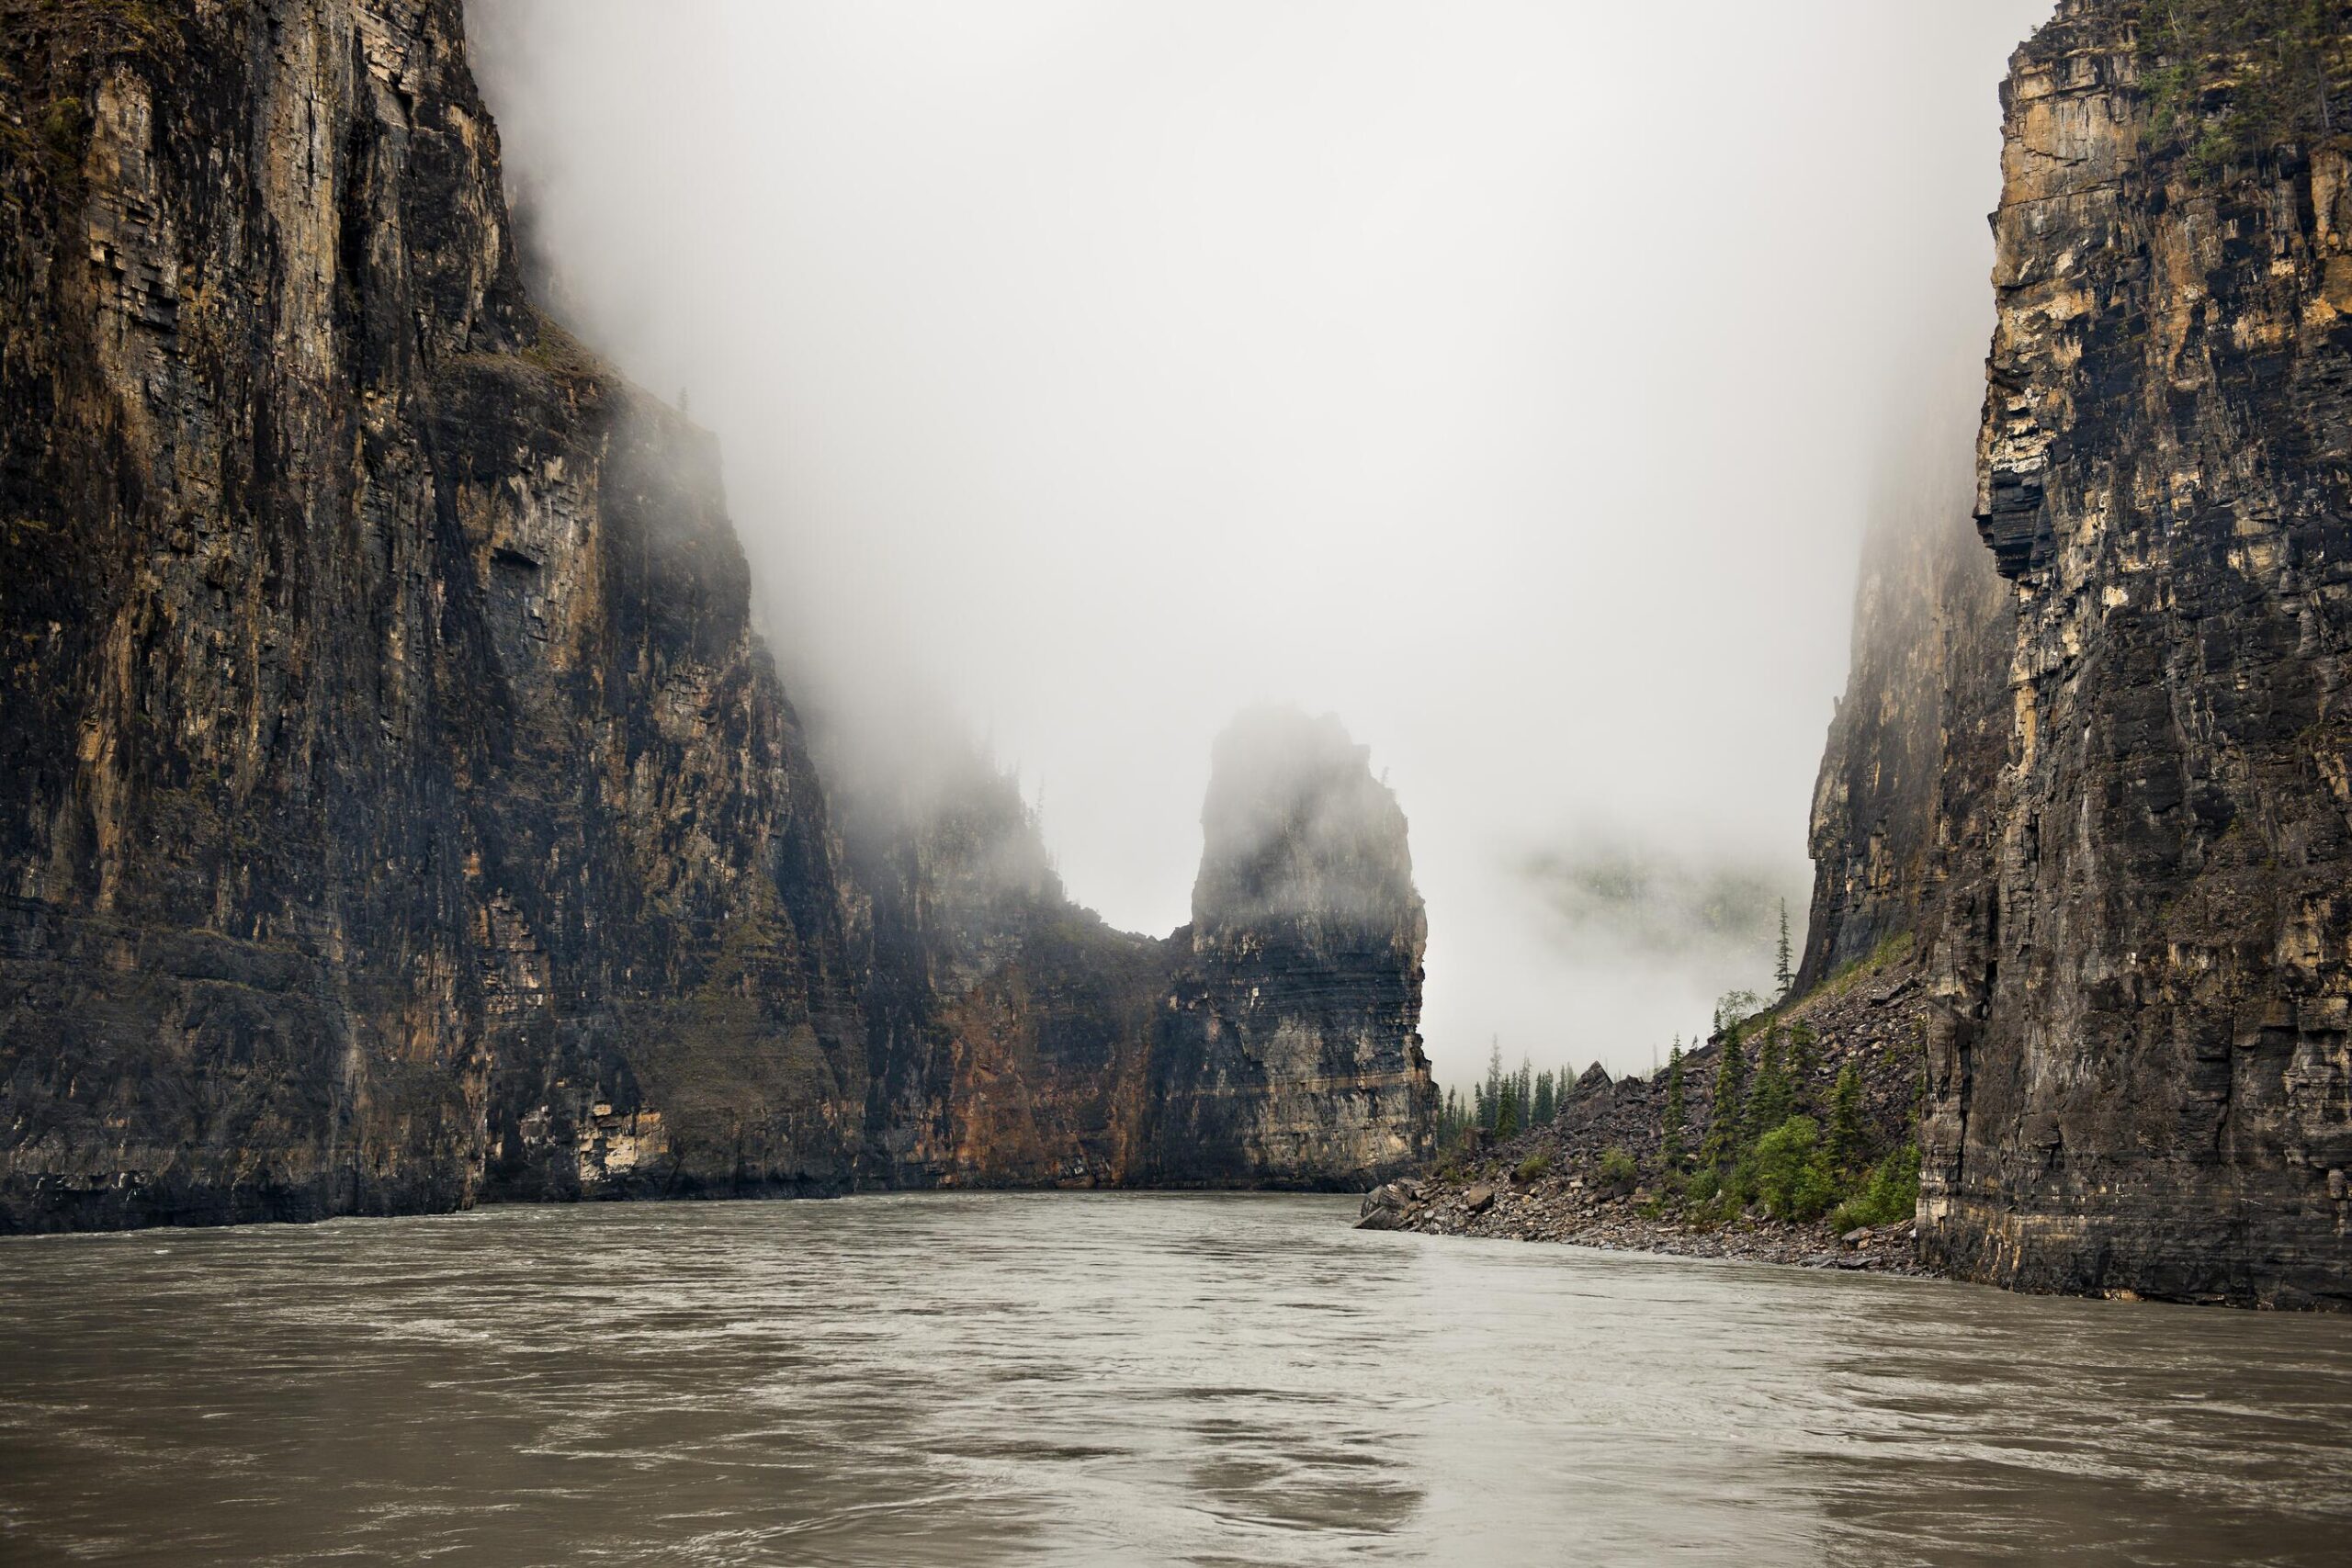 The Nahanni Valley, were the bodies were discovered